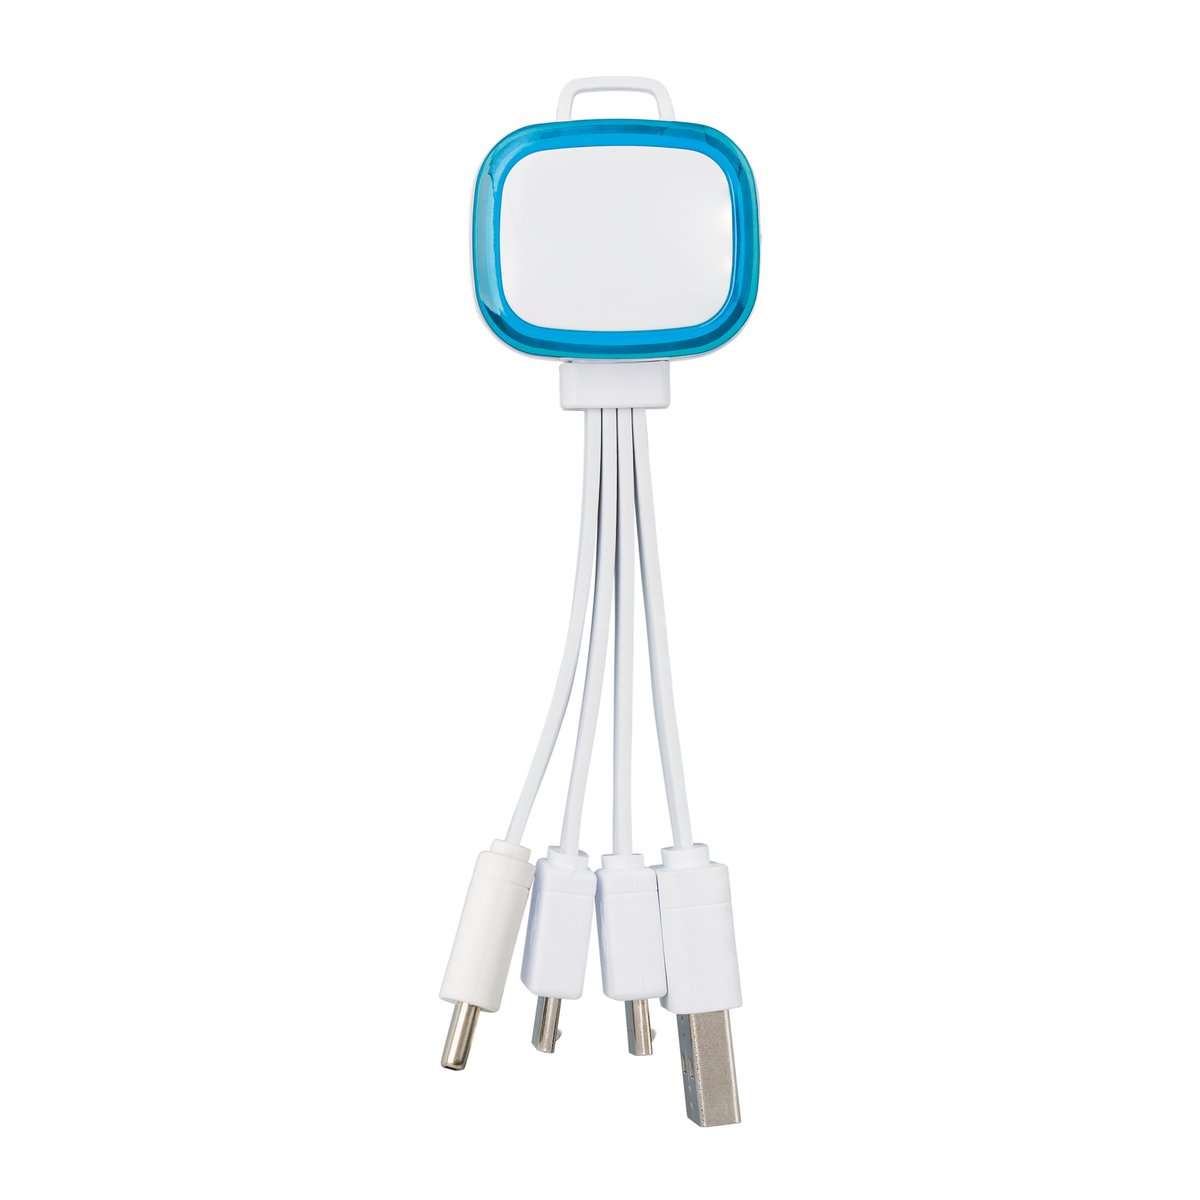 Multi USB charging cable COLLECTION 500 light blue